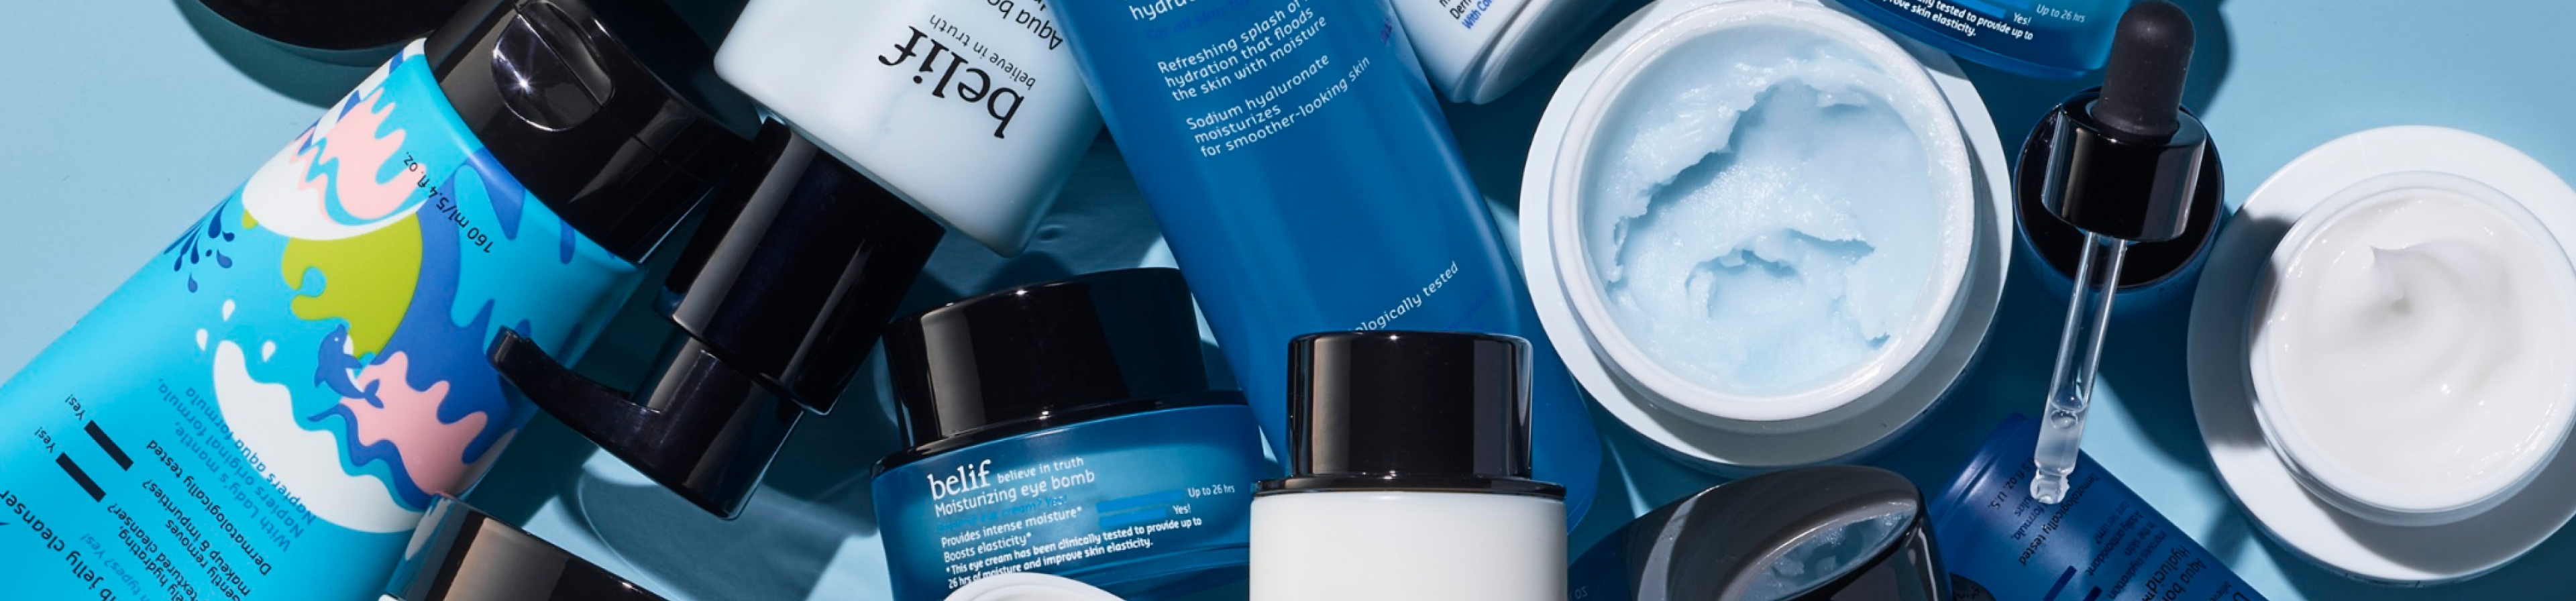 A collection of belif skincare products is scattered across a light blue background with some containers open and others closed